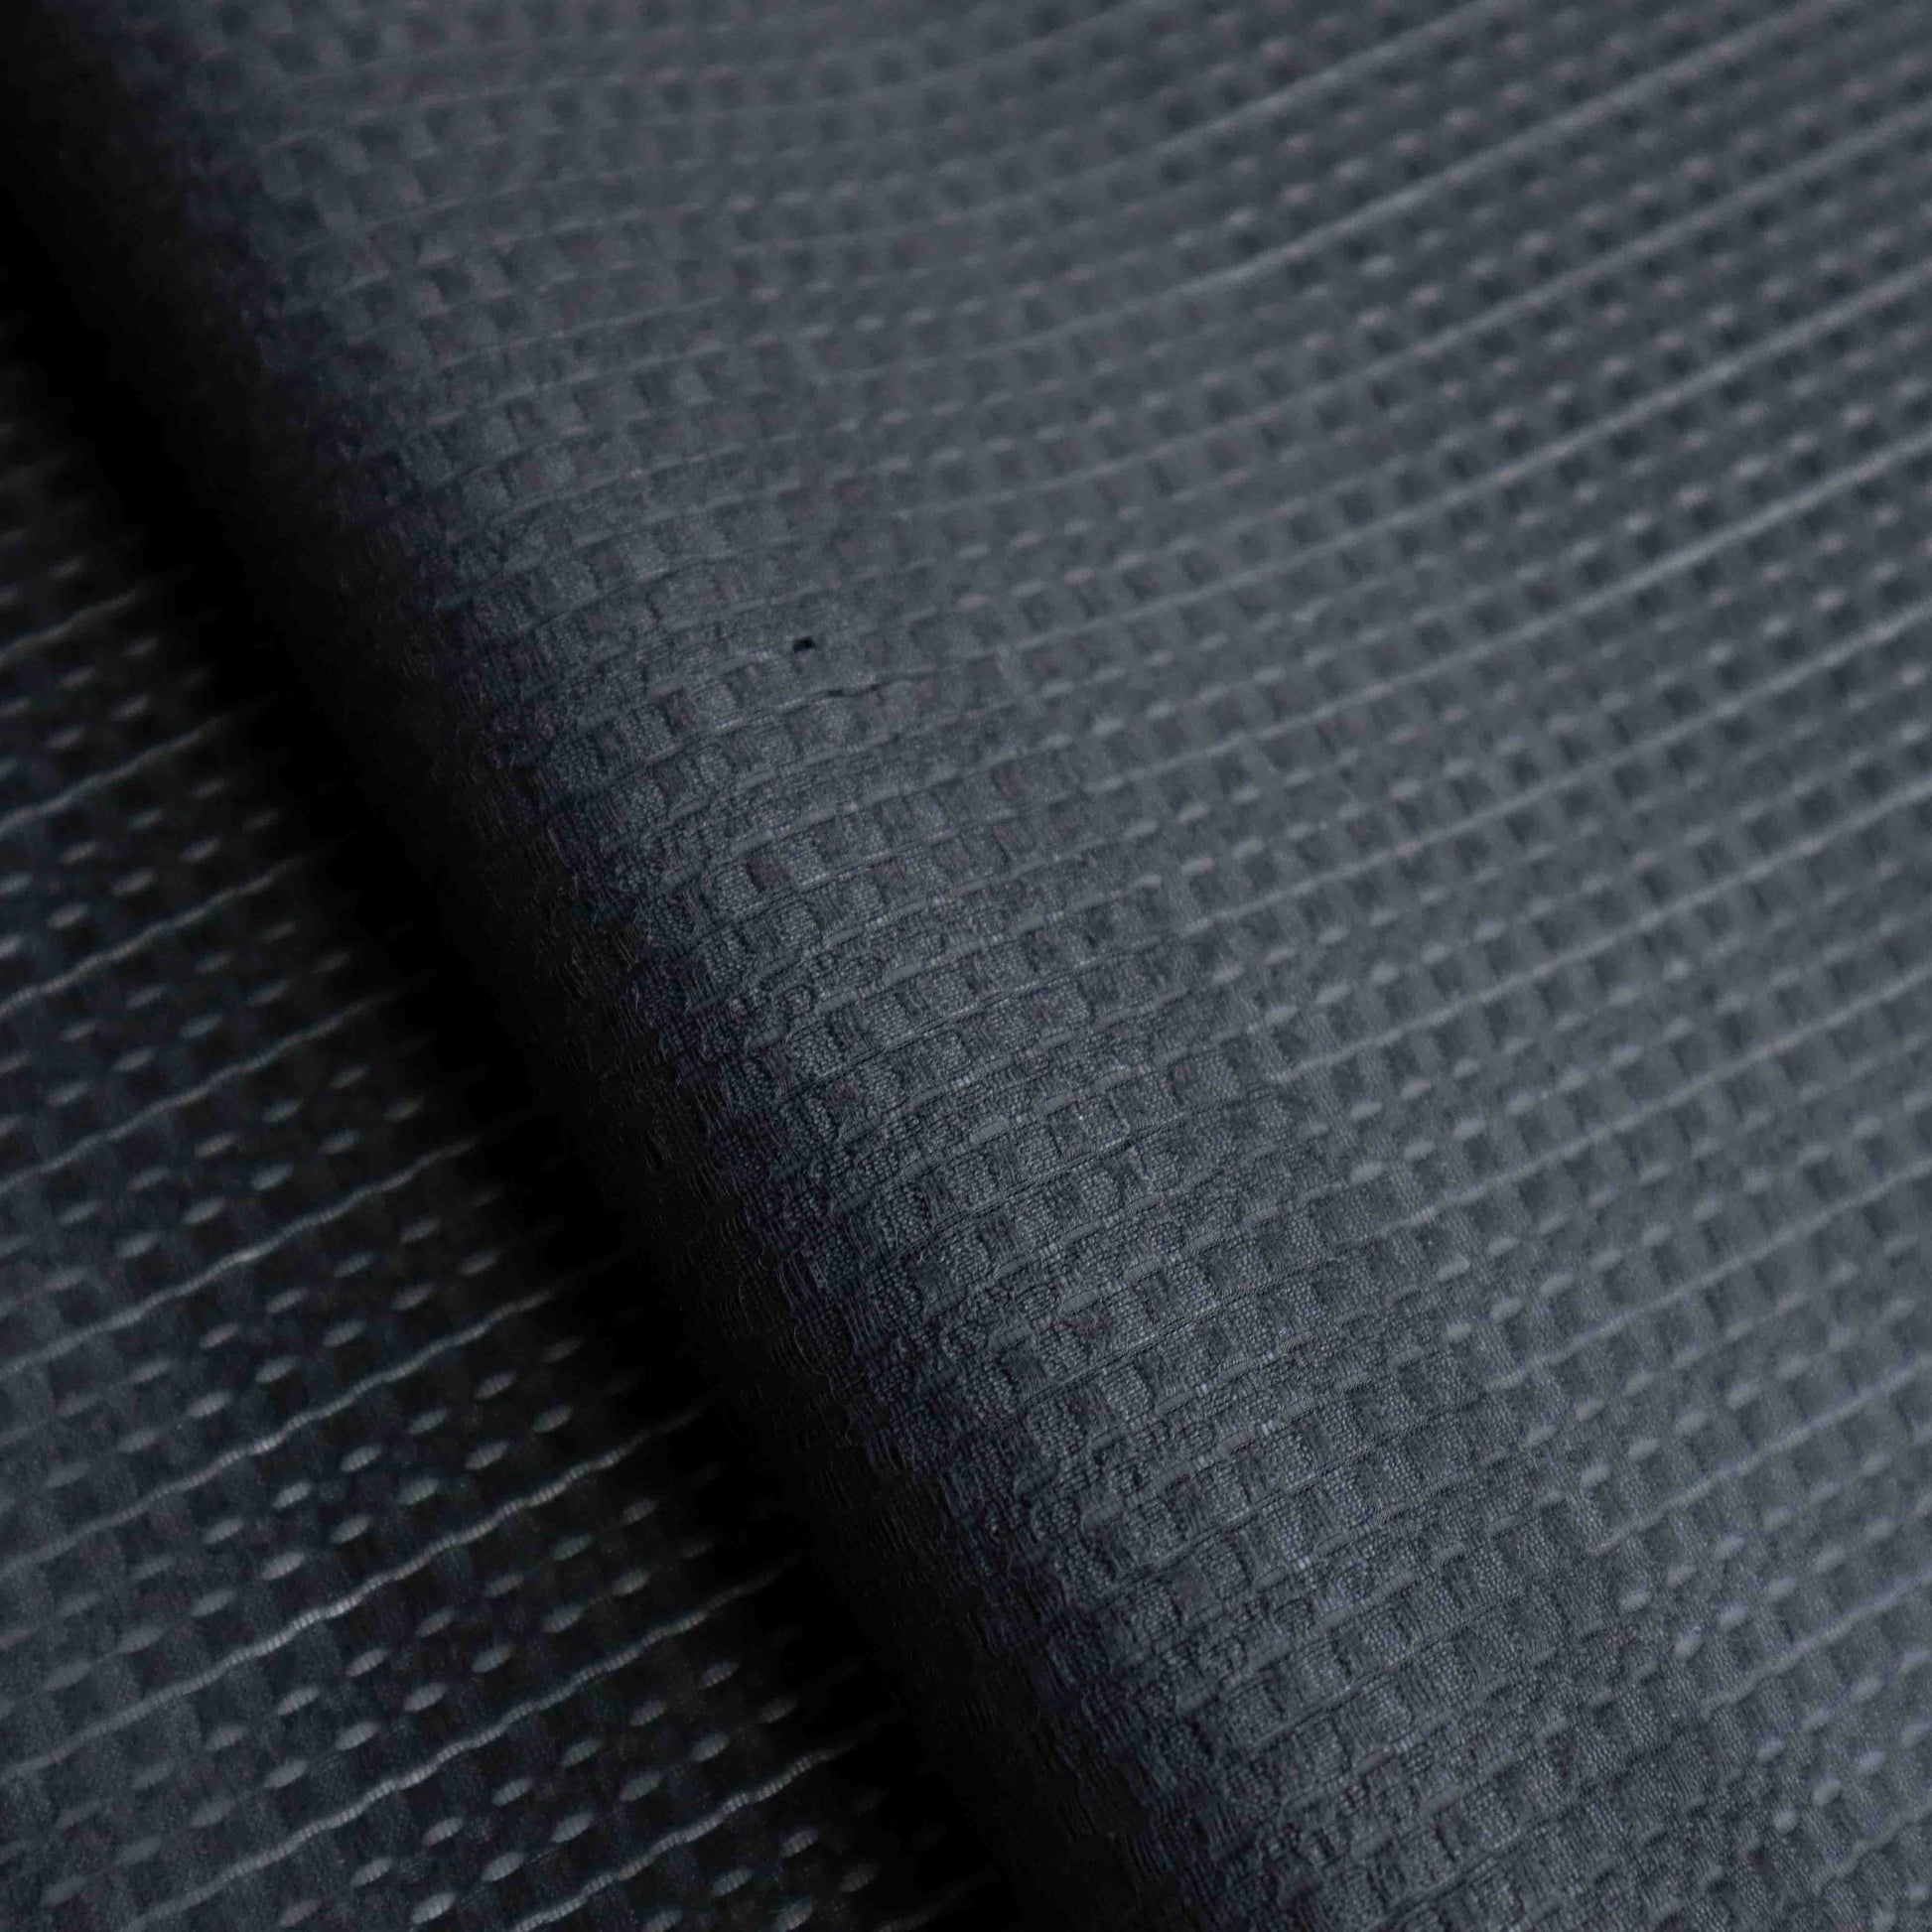 An European-made lightweight polyester silk in Black Caviar. Composing of neatly arranged black small squares, this almost opaque fabric is extremely comfortable and breathable. This fabric has a dry, smooth hand feel yet softens considerably after washing.